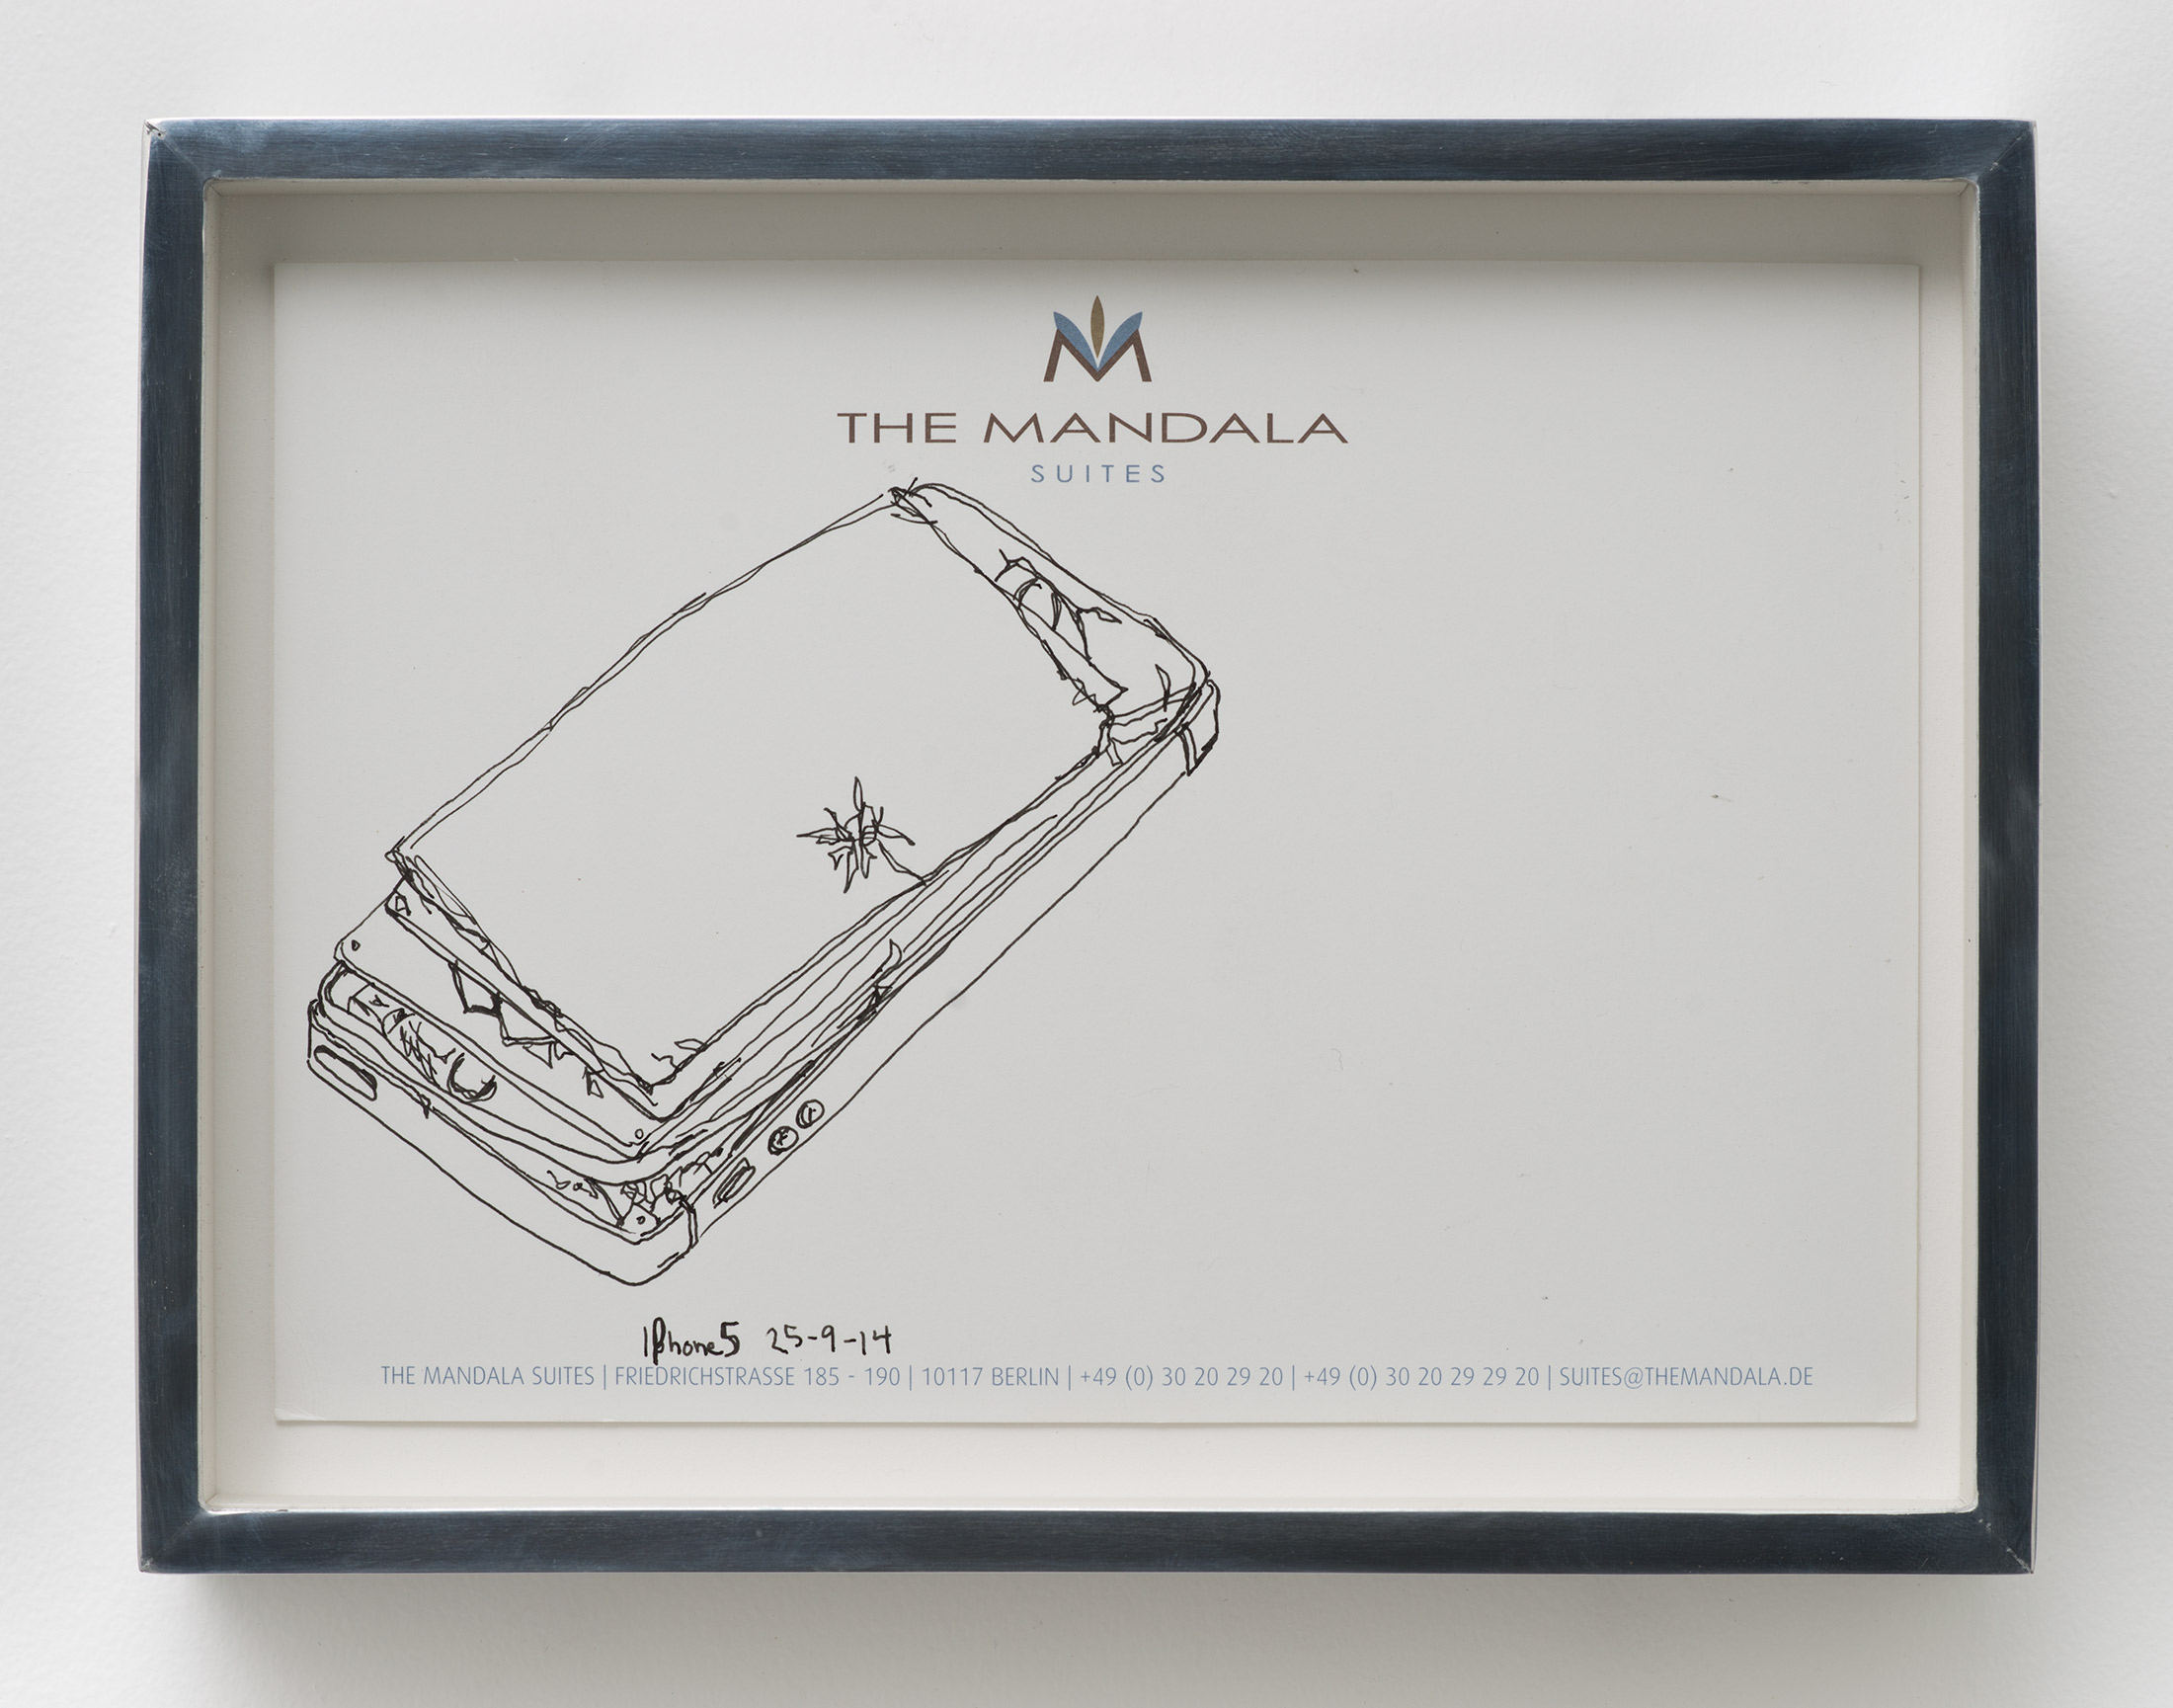   iPhone 5 A1429: The Mandala Hotel, Berlin, Germany, September 25, 2014    2015   Ink on letterhead  7 1/4 x 9 1/2 inches   Drawings, 2014–     